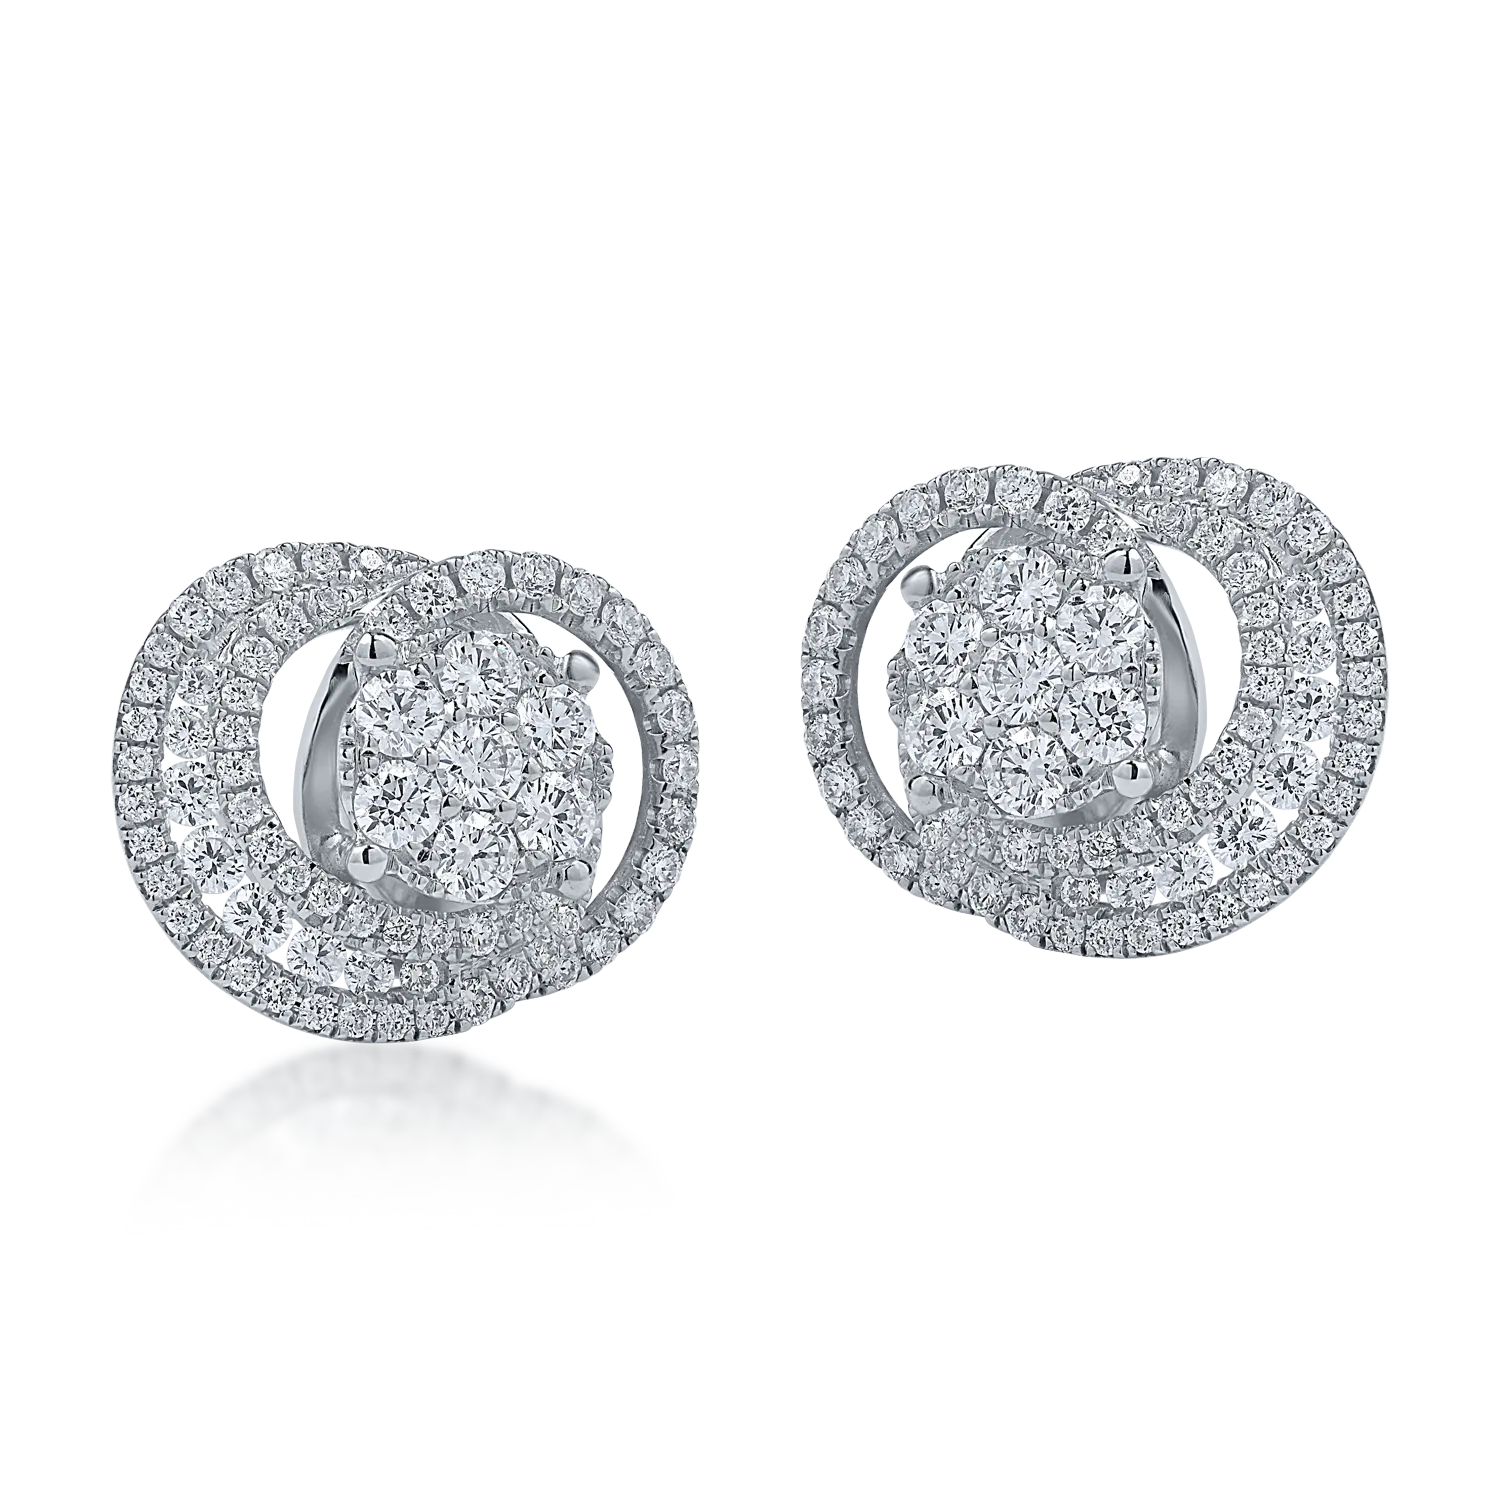 White gold earrings with 0.89ct diamonds